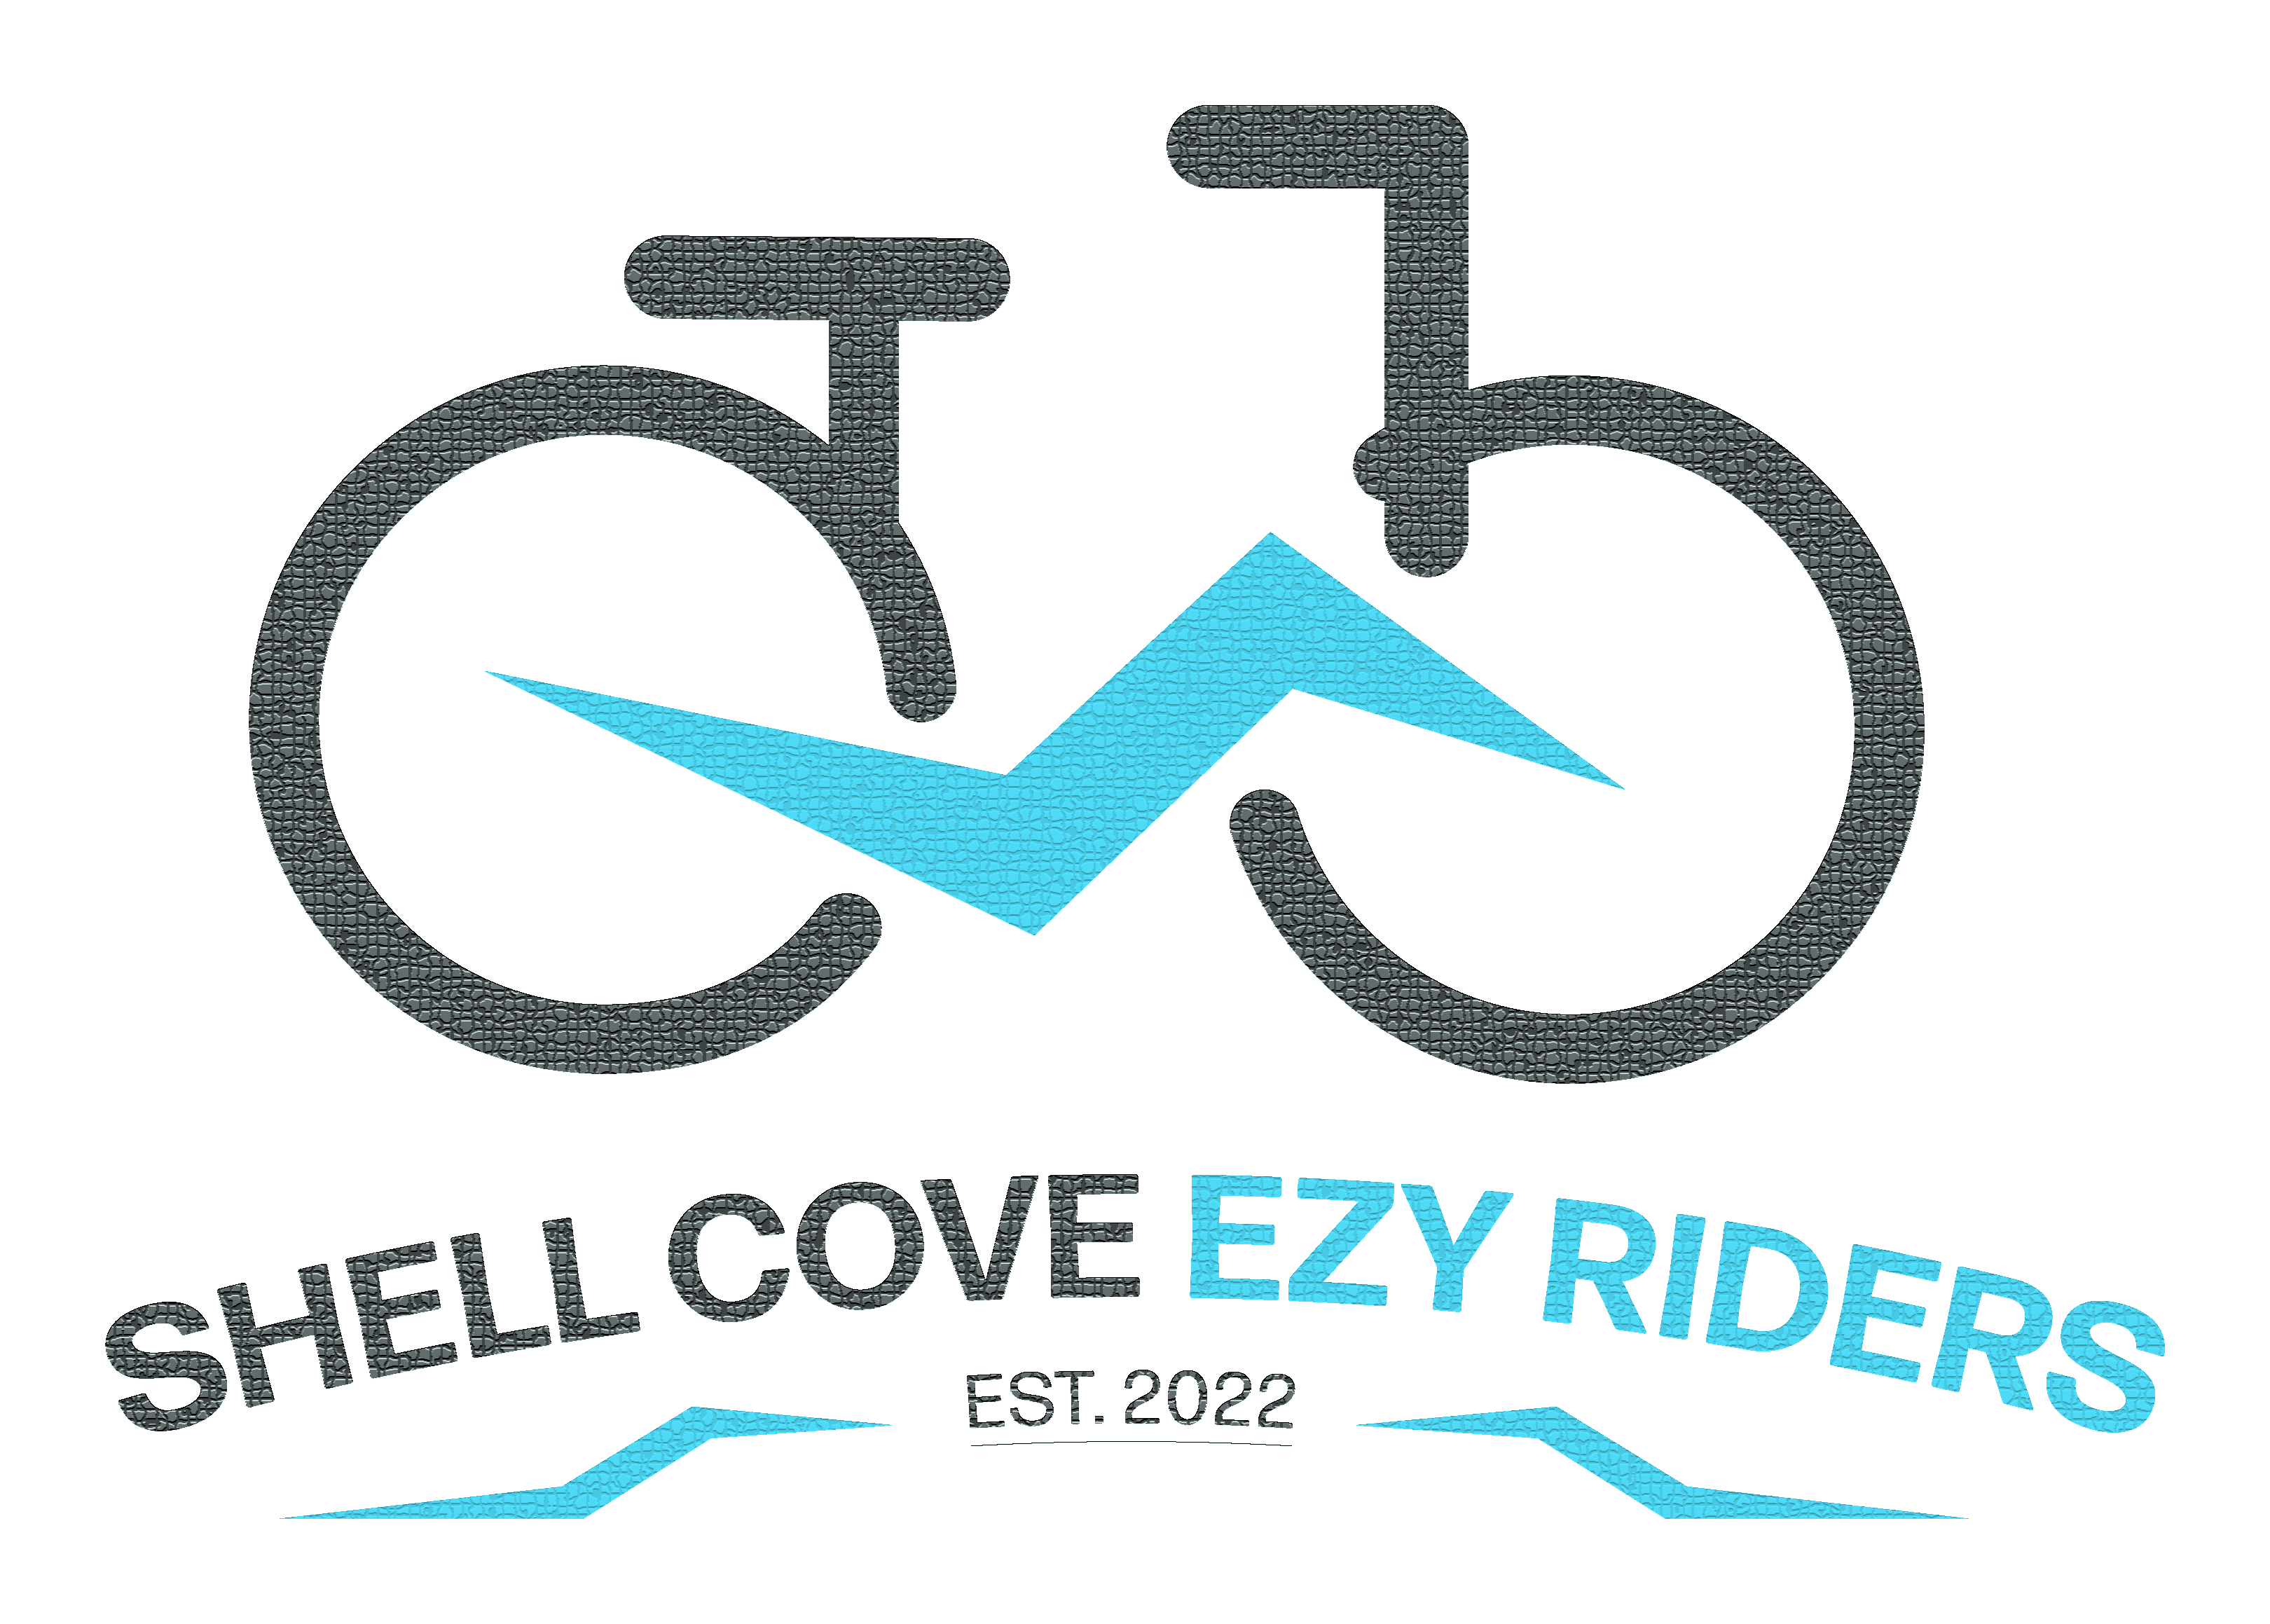 Shell Cove EZY Riders.png